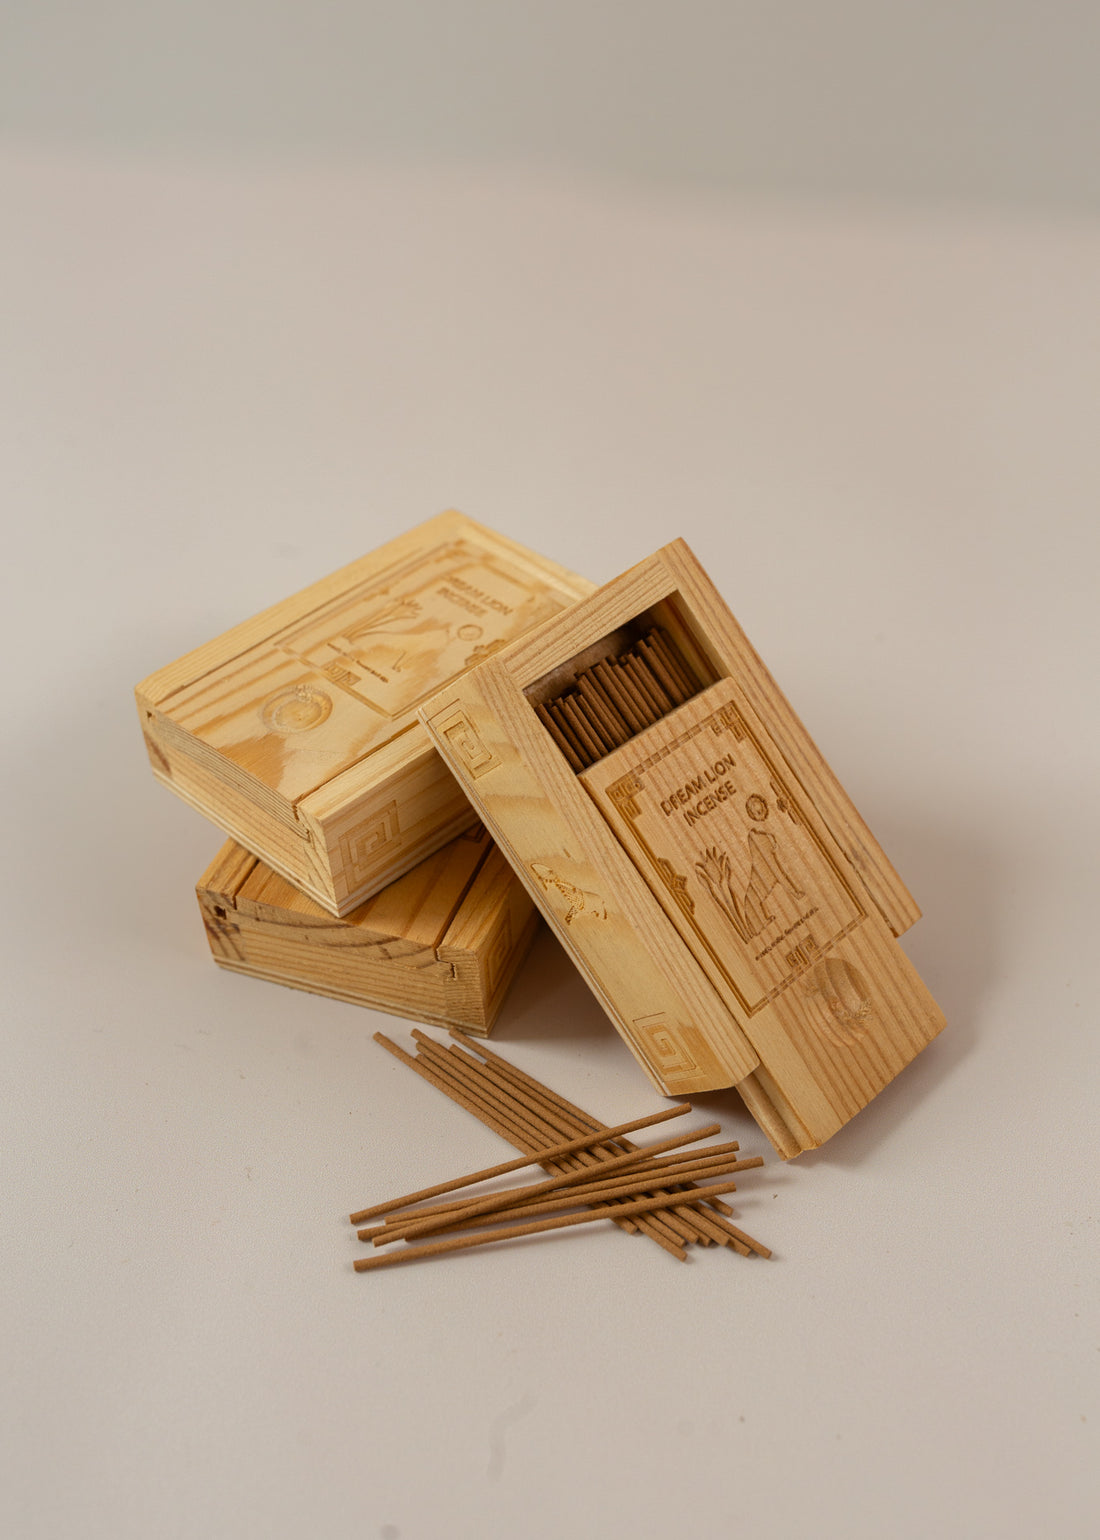 3 wooden boxes piled up with one angles towards the camera and half open to reveal mini incense sticks, with a few piled up in front of the boxes